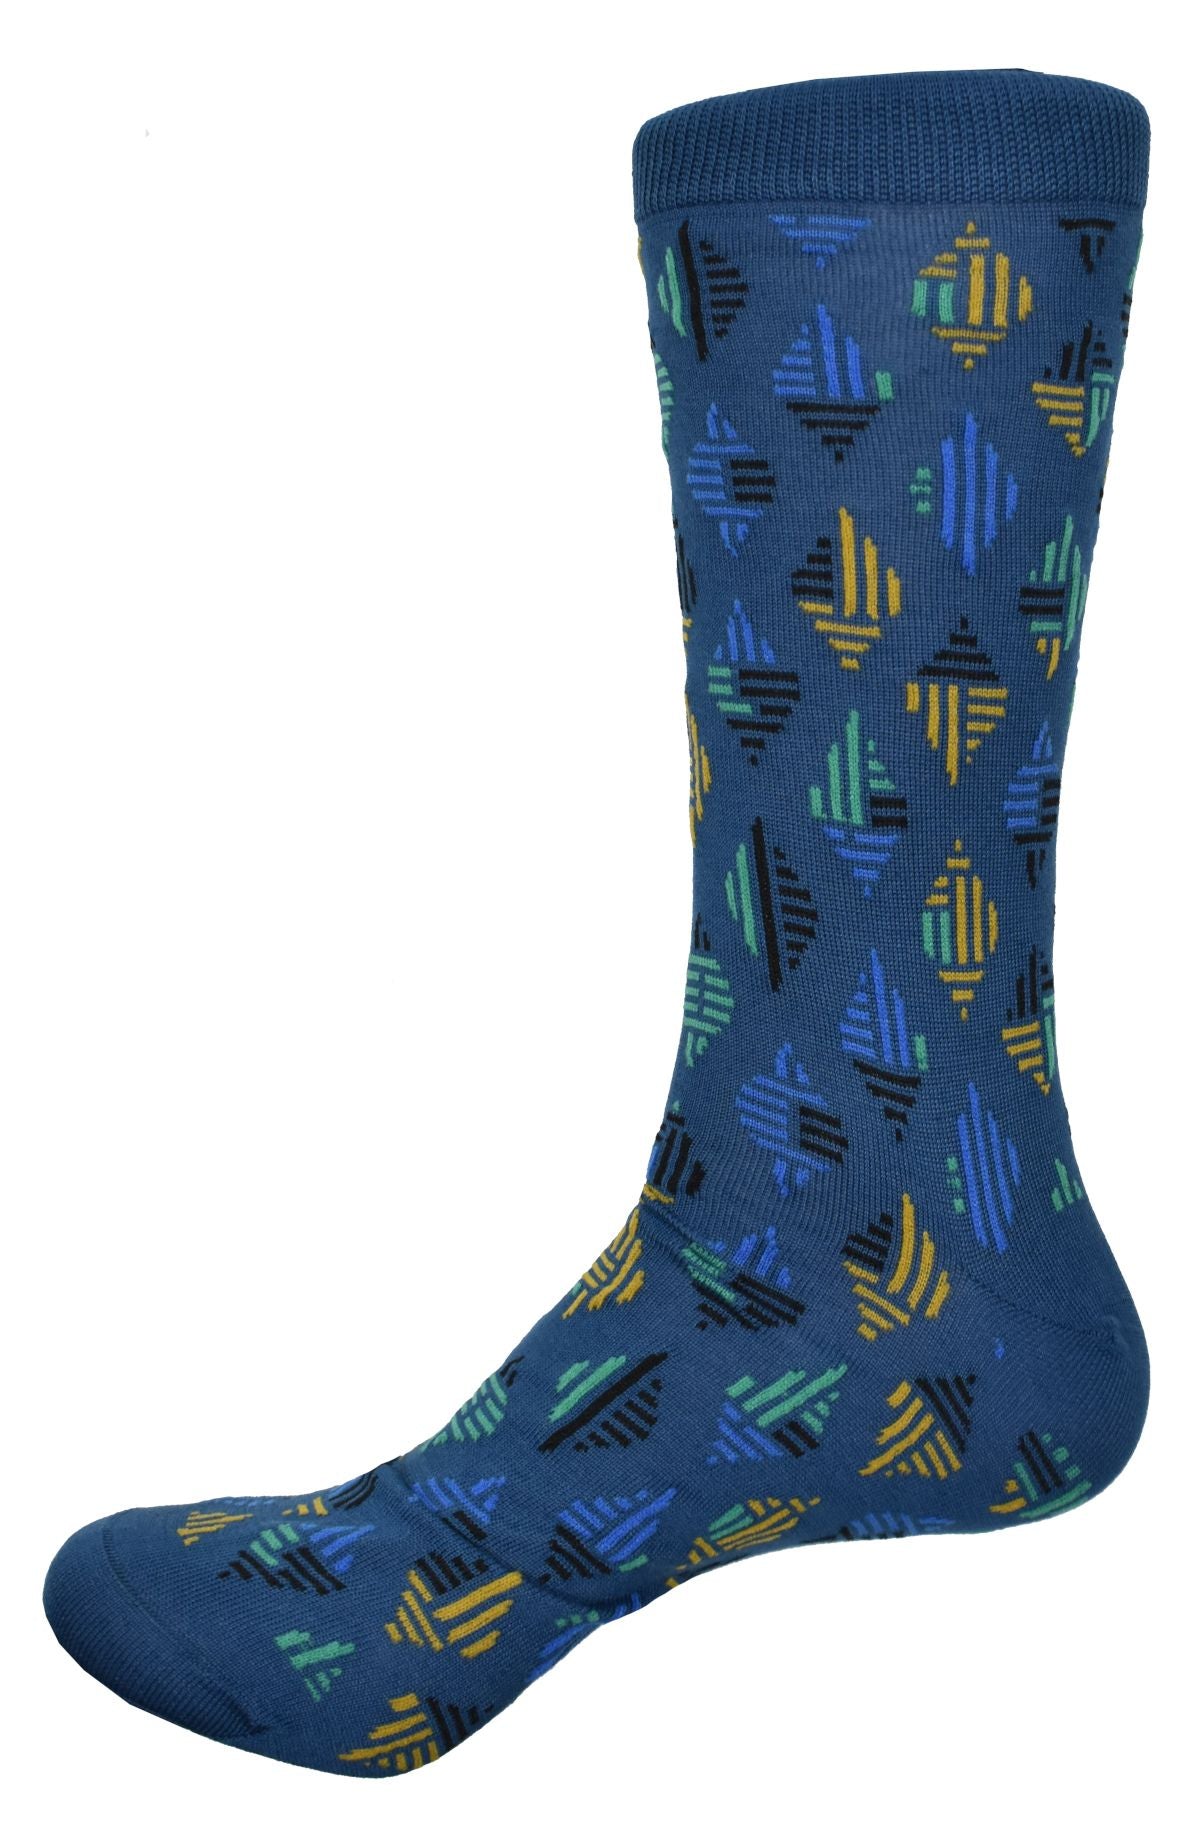 Indigo blue sock with floating geometric diamonds utilizing blue, gold, mint and black colors.  Mercerized cotton and lycra to hold its shape and feel great on.  Fits sizes 9-11.